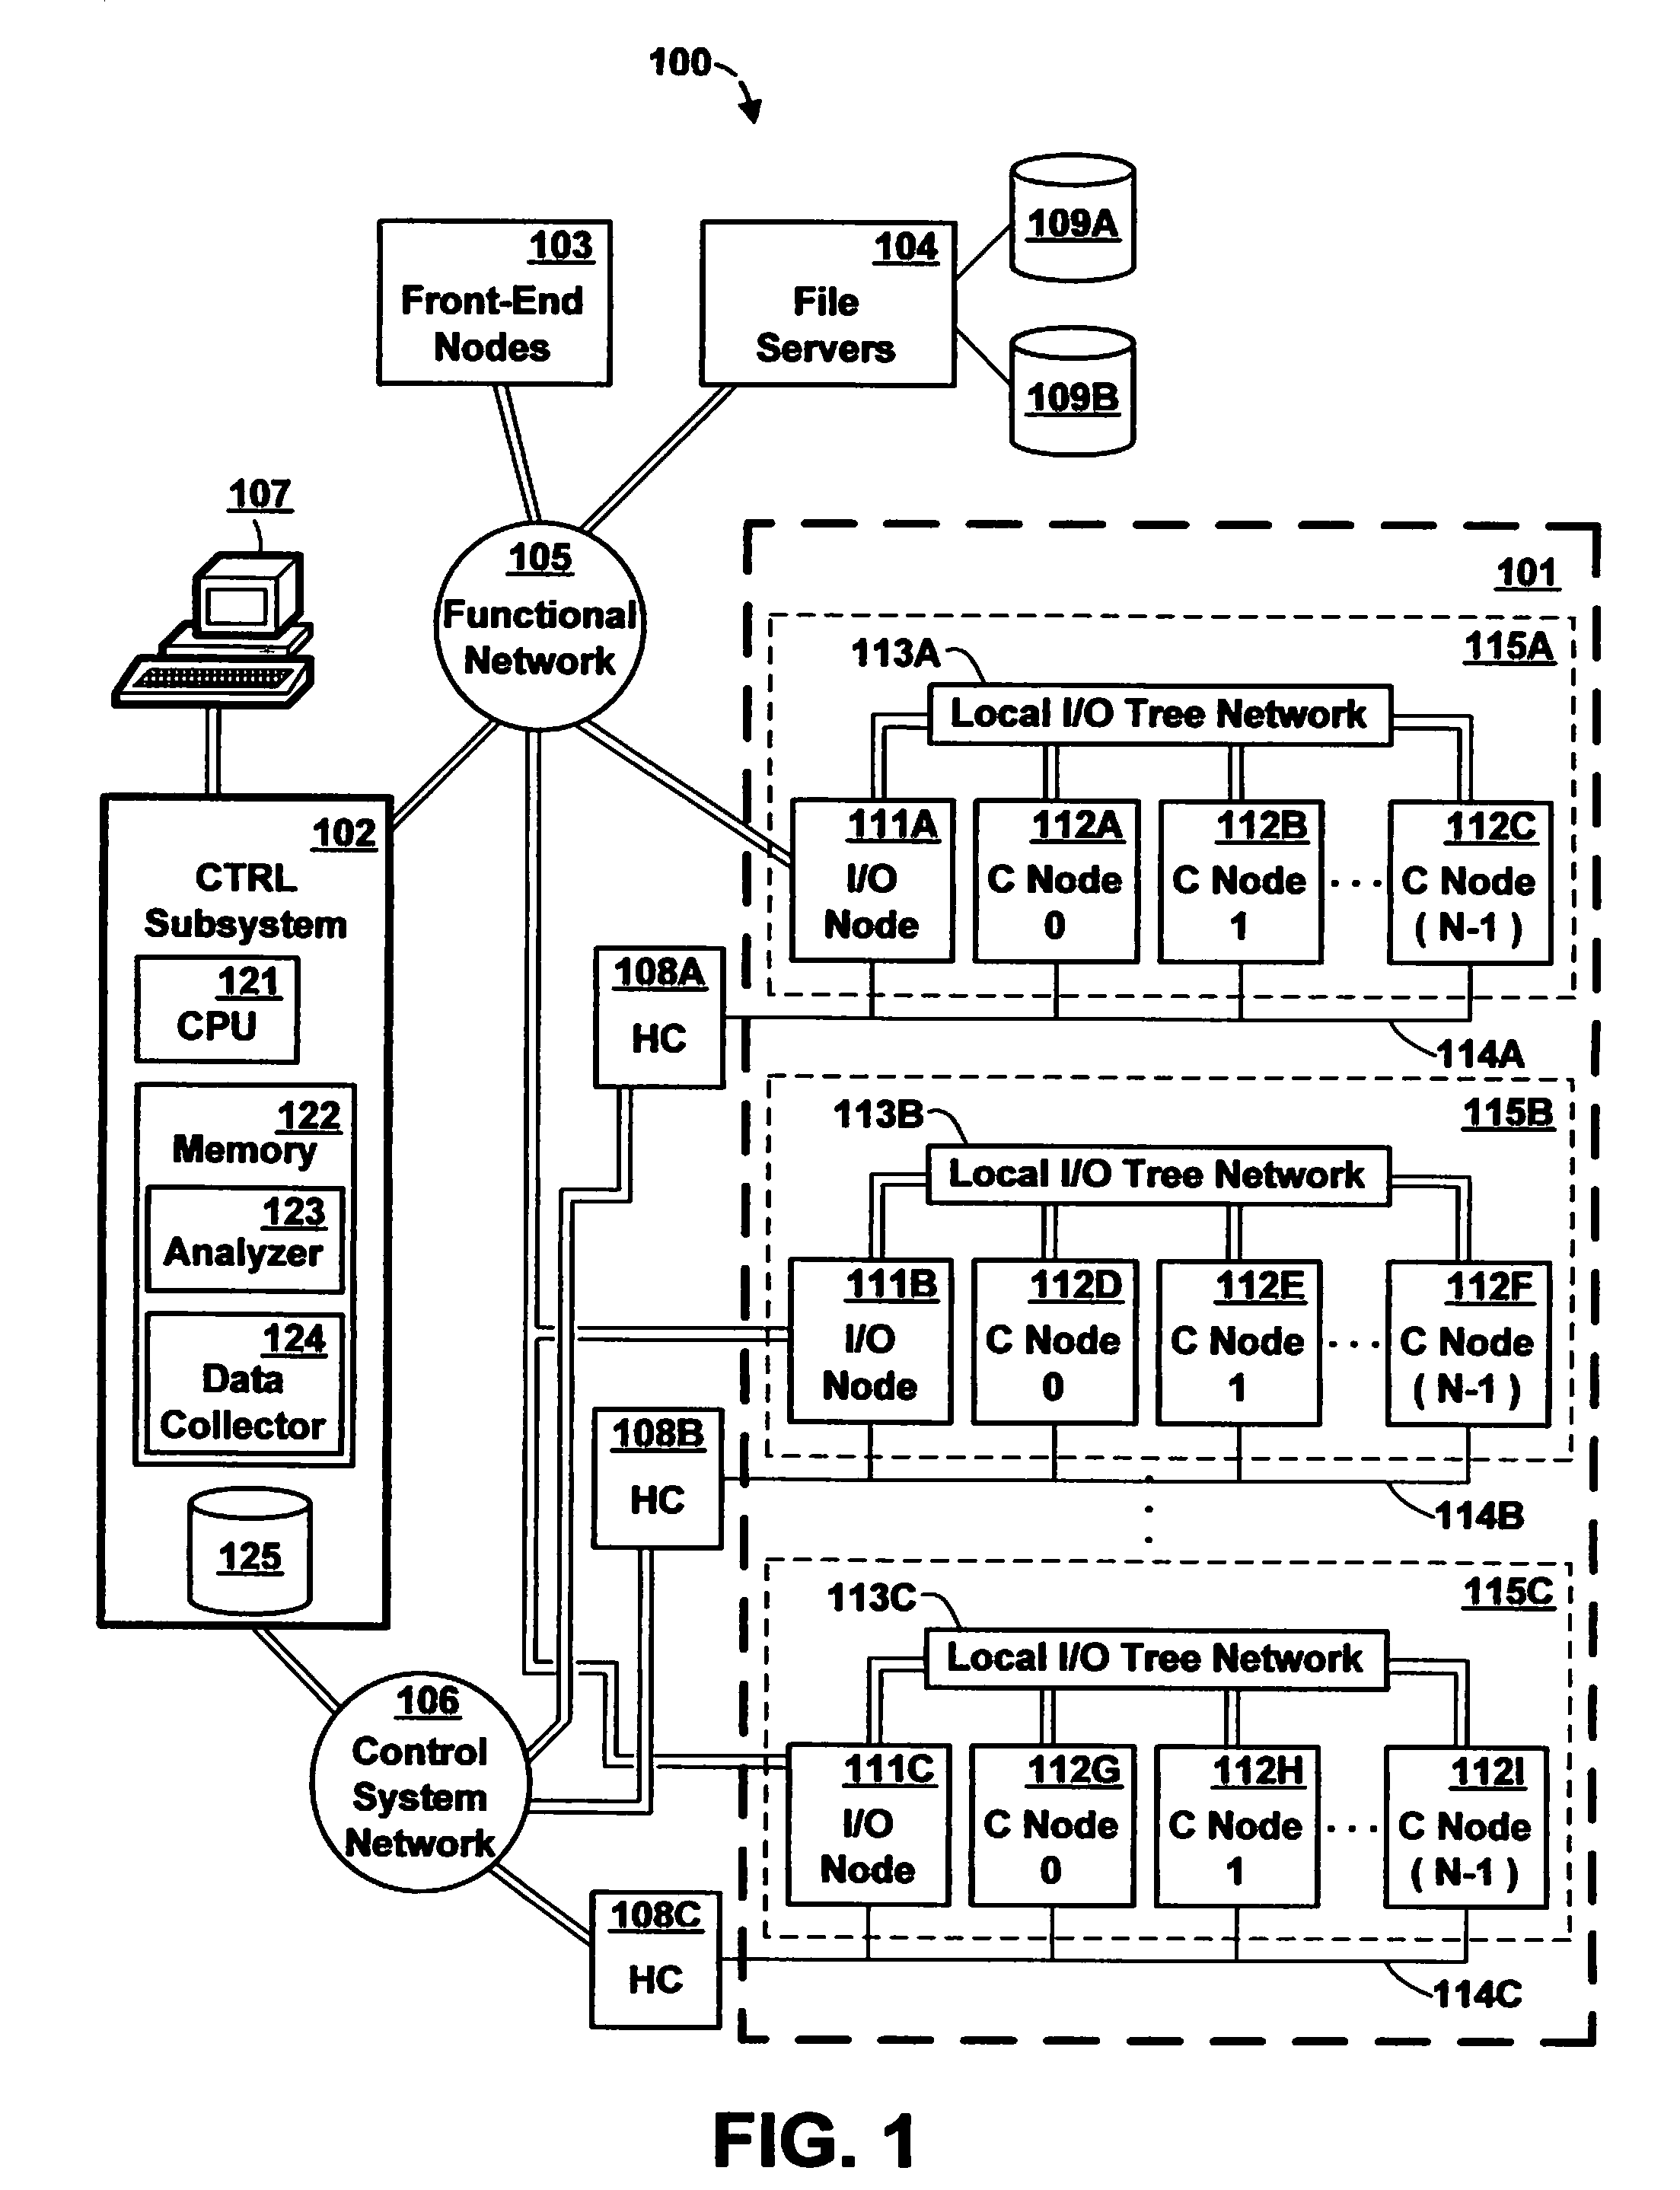 Method and apparatus for obtaining stack traceback data for multiple computing nodes of a massively parallel computer system